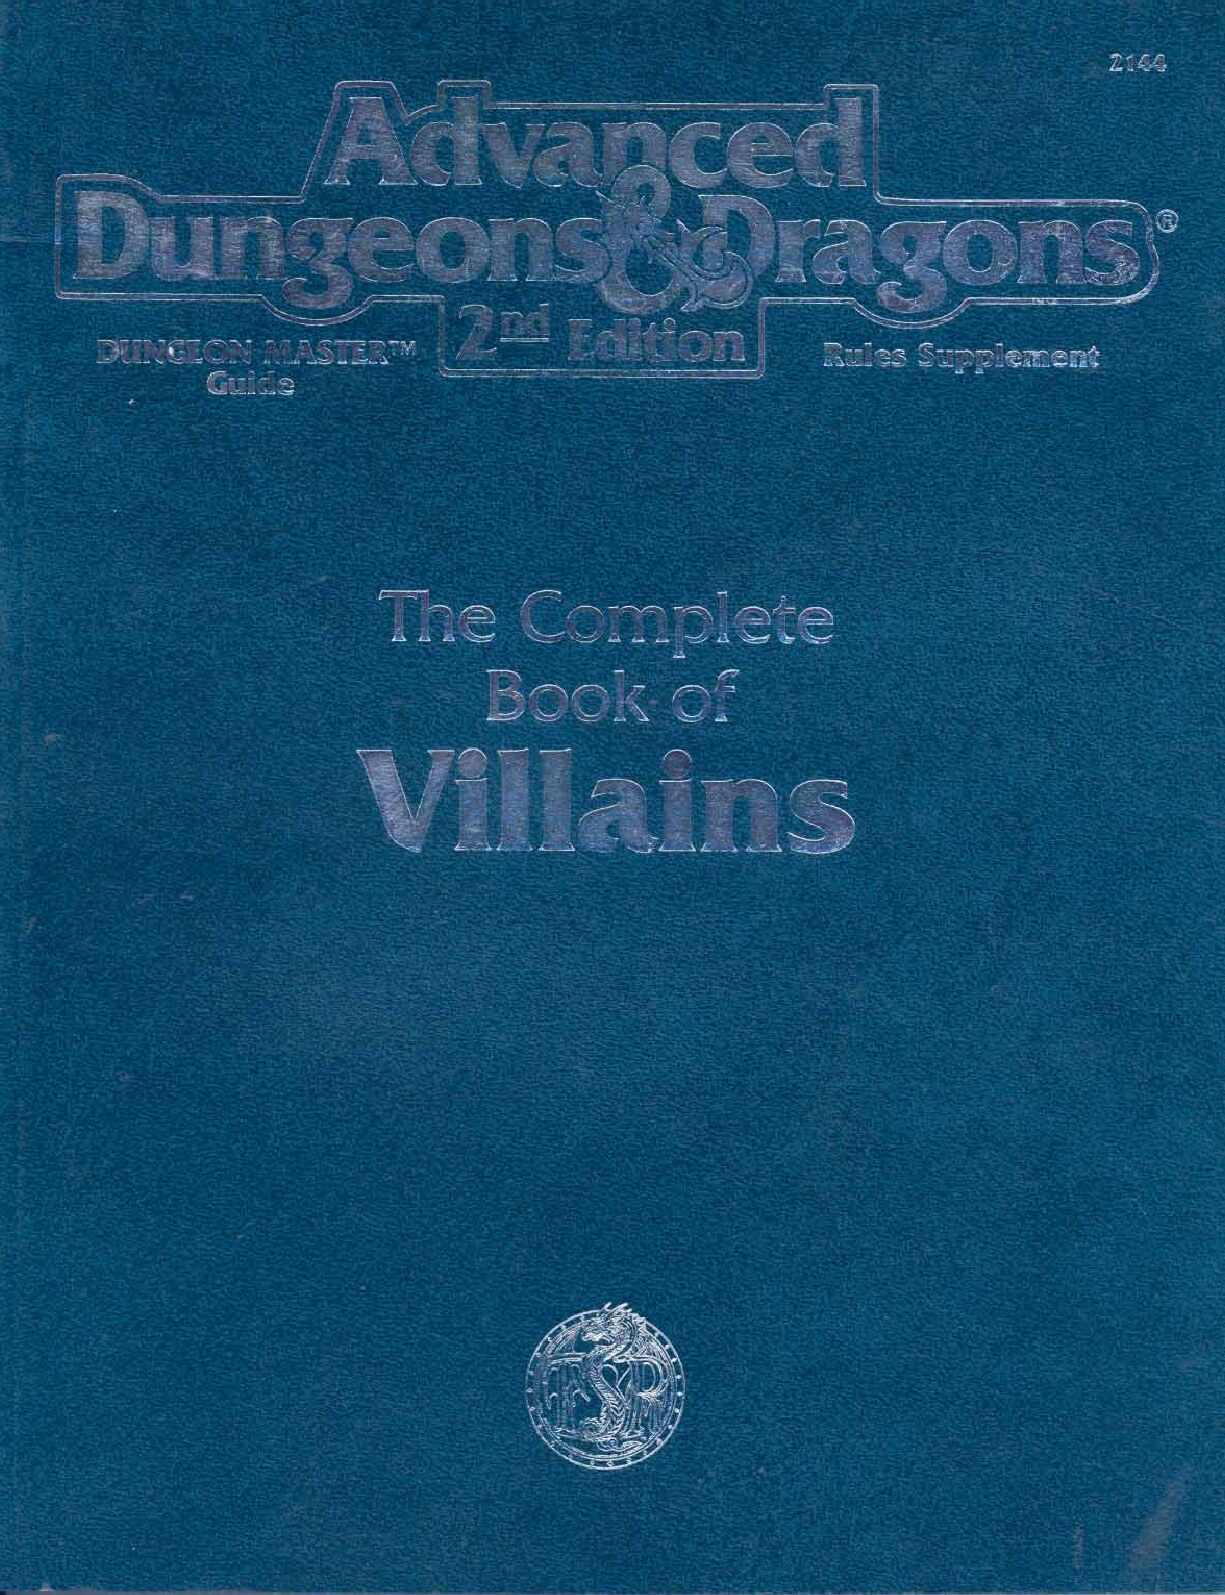 DMGR6 - The Complete Book of Villains (2144)